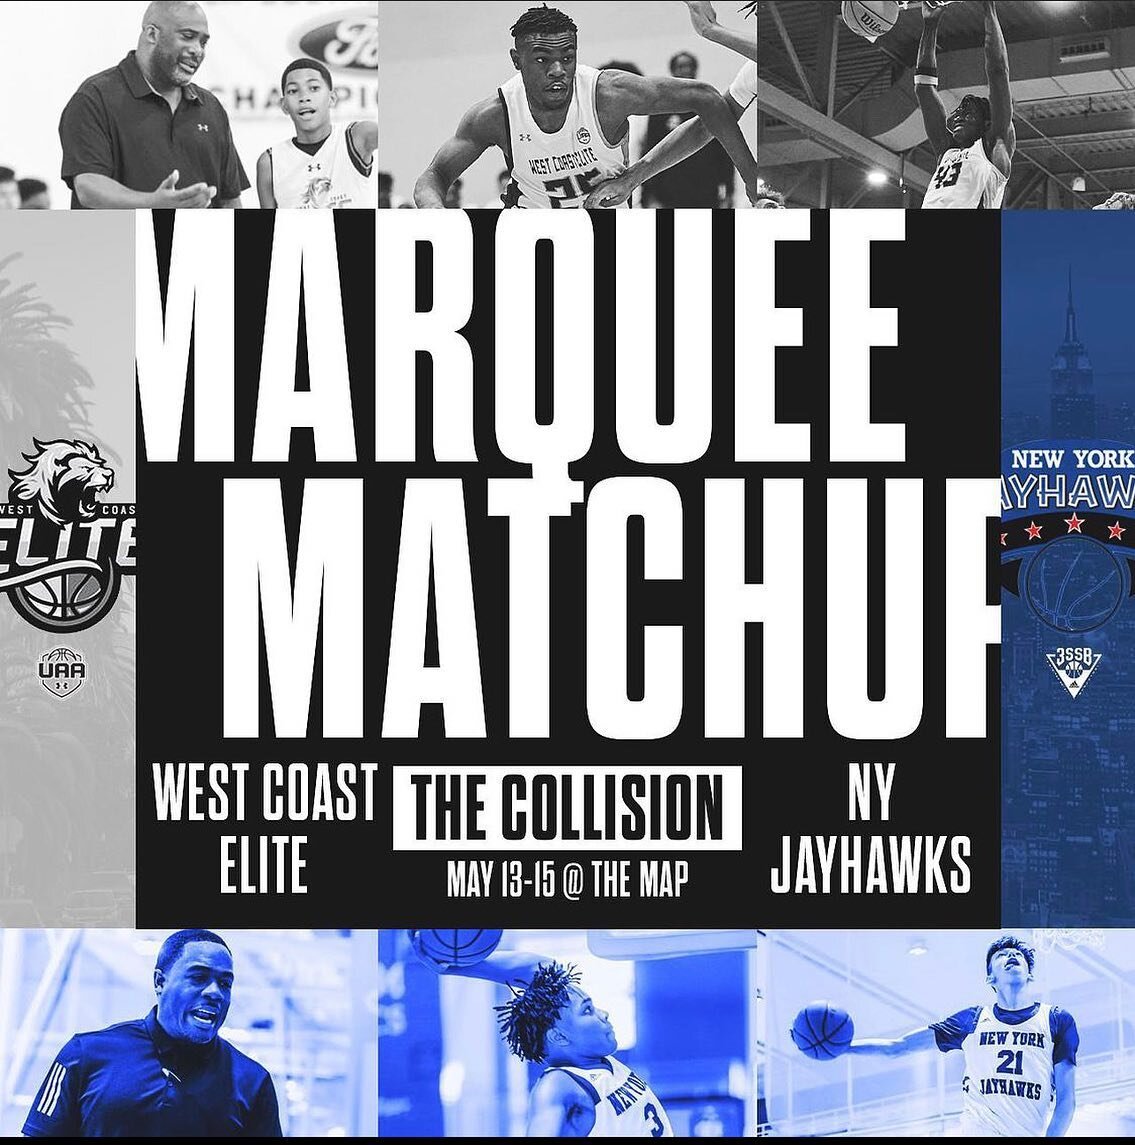 Marquee Matchup of May at the Collision West 👀!!

In a battle of the East vs West coast, The NY Jayhawks(3SSB) vs West Coast Elite(UAA) will be a matchup not to be missed! 

#thecollisionwest #eleve11hoops